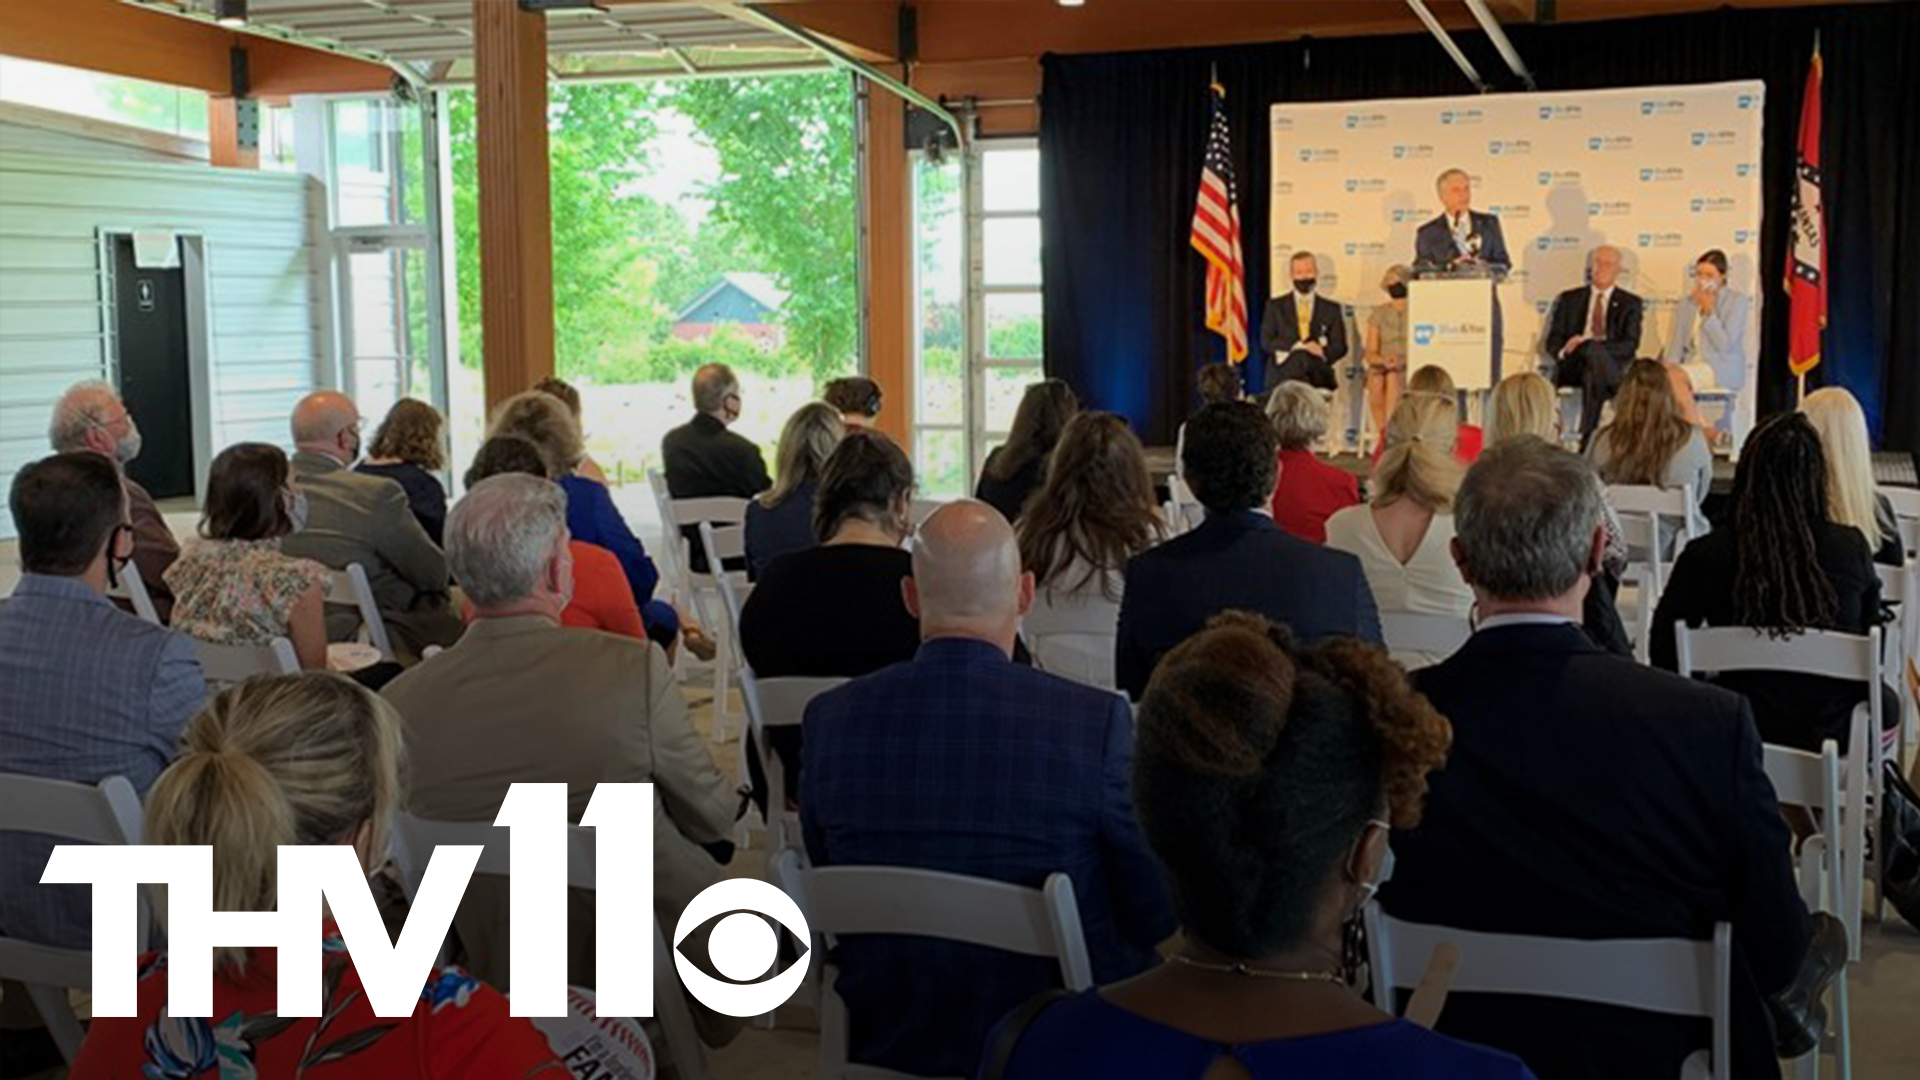 The Blue & You Foundation for a Healthier Arkansas announced $5.29 million in grants will be awarded to behavioral health programs in the state.